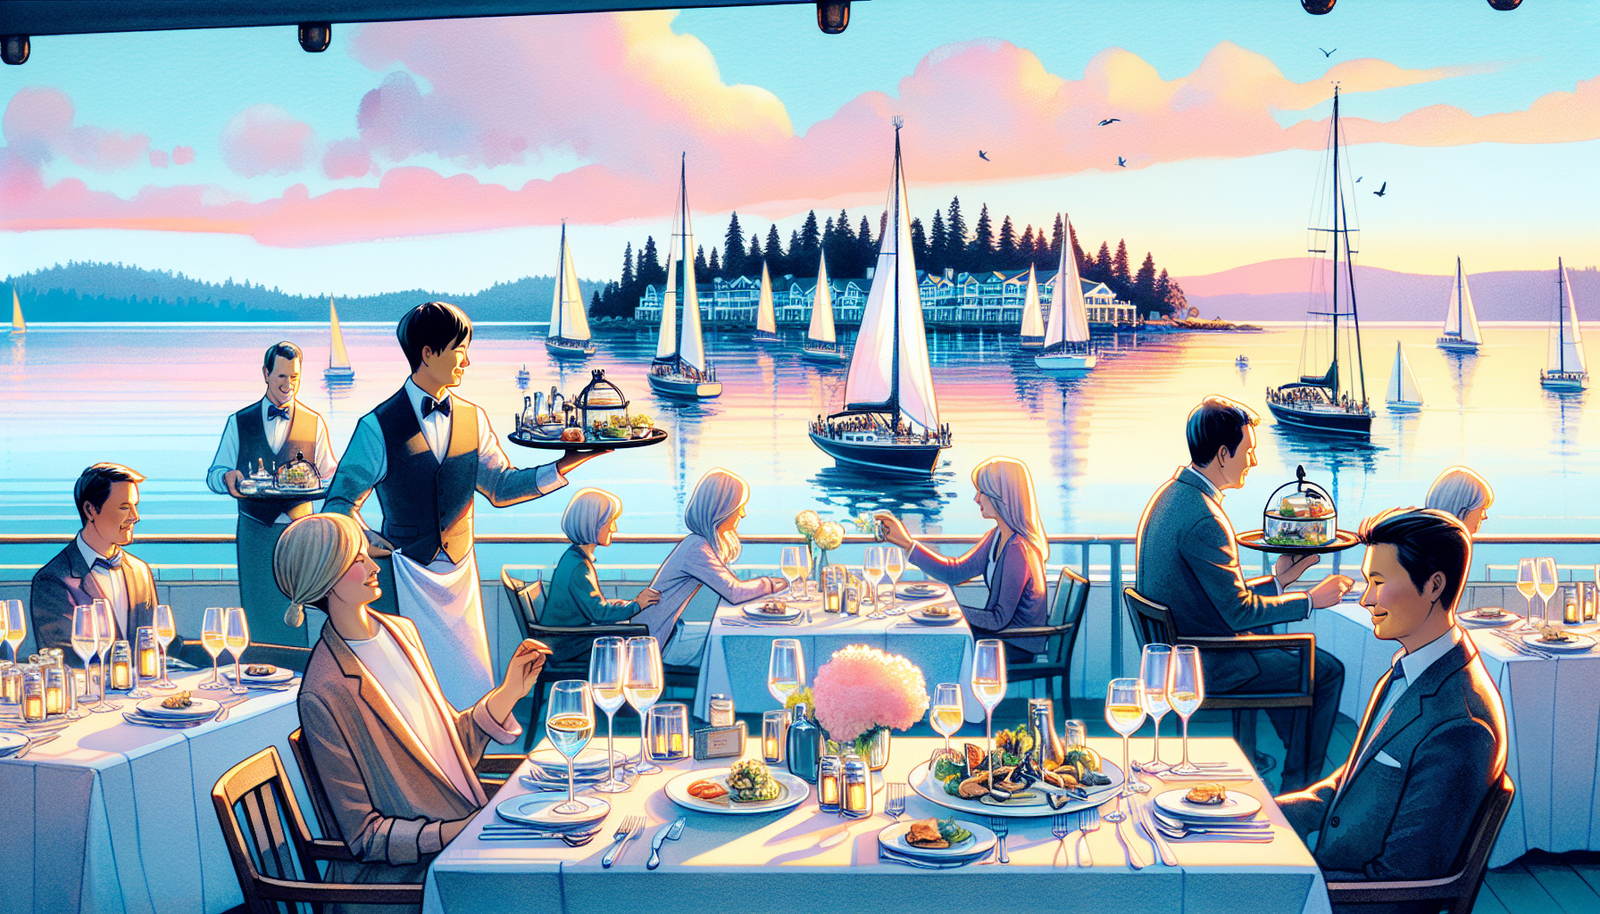 Waterfront dining in Victoria